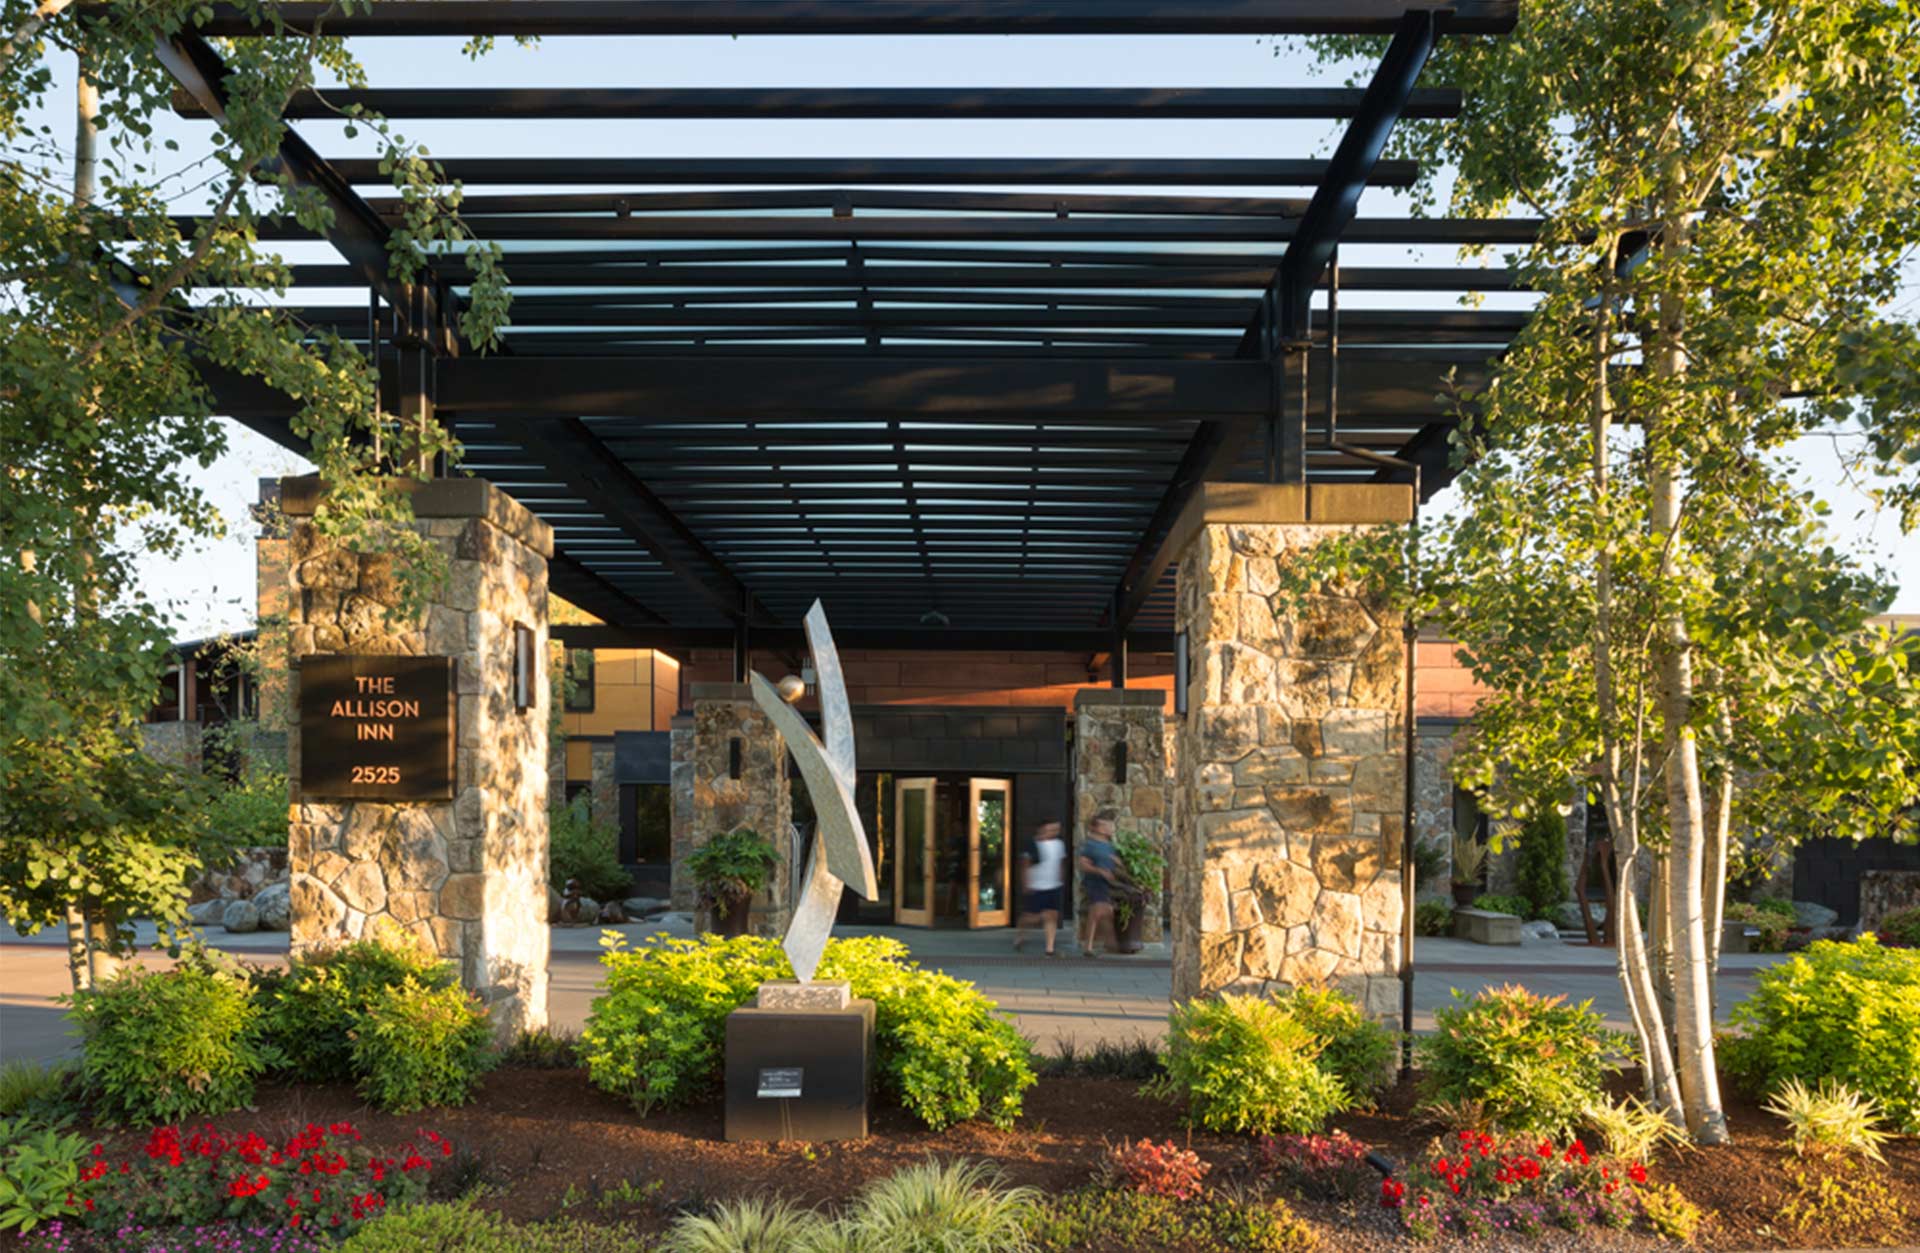 The Allison Inn and Spa entrance with trees and flowers